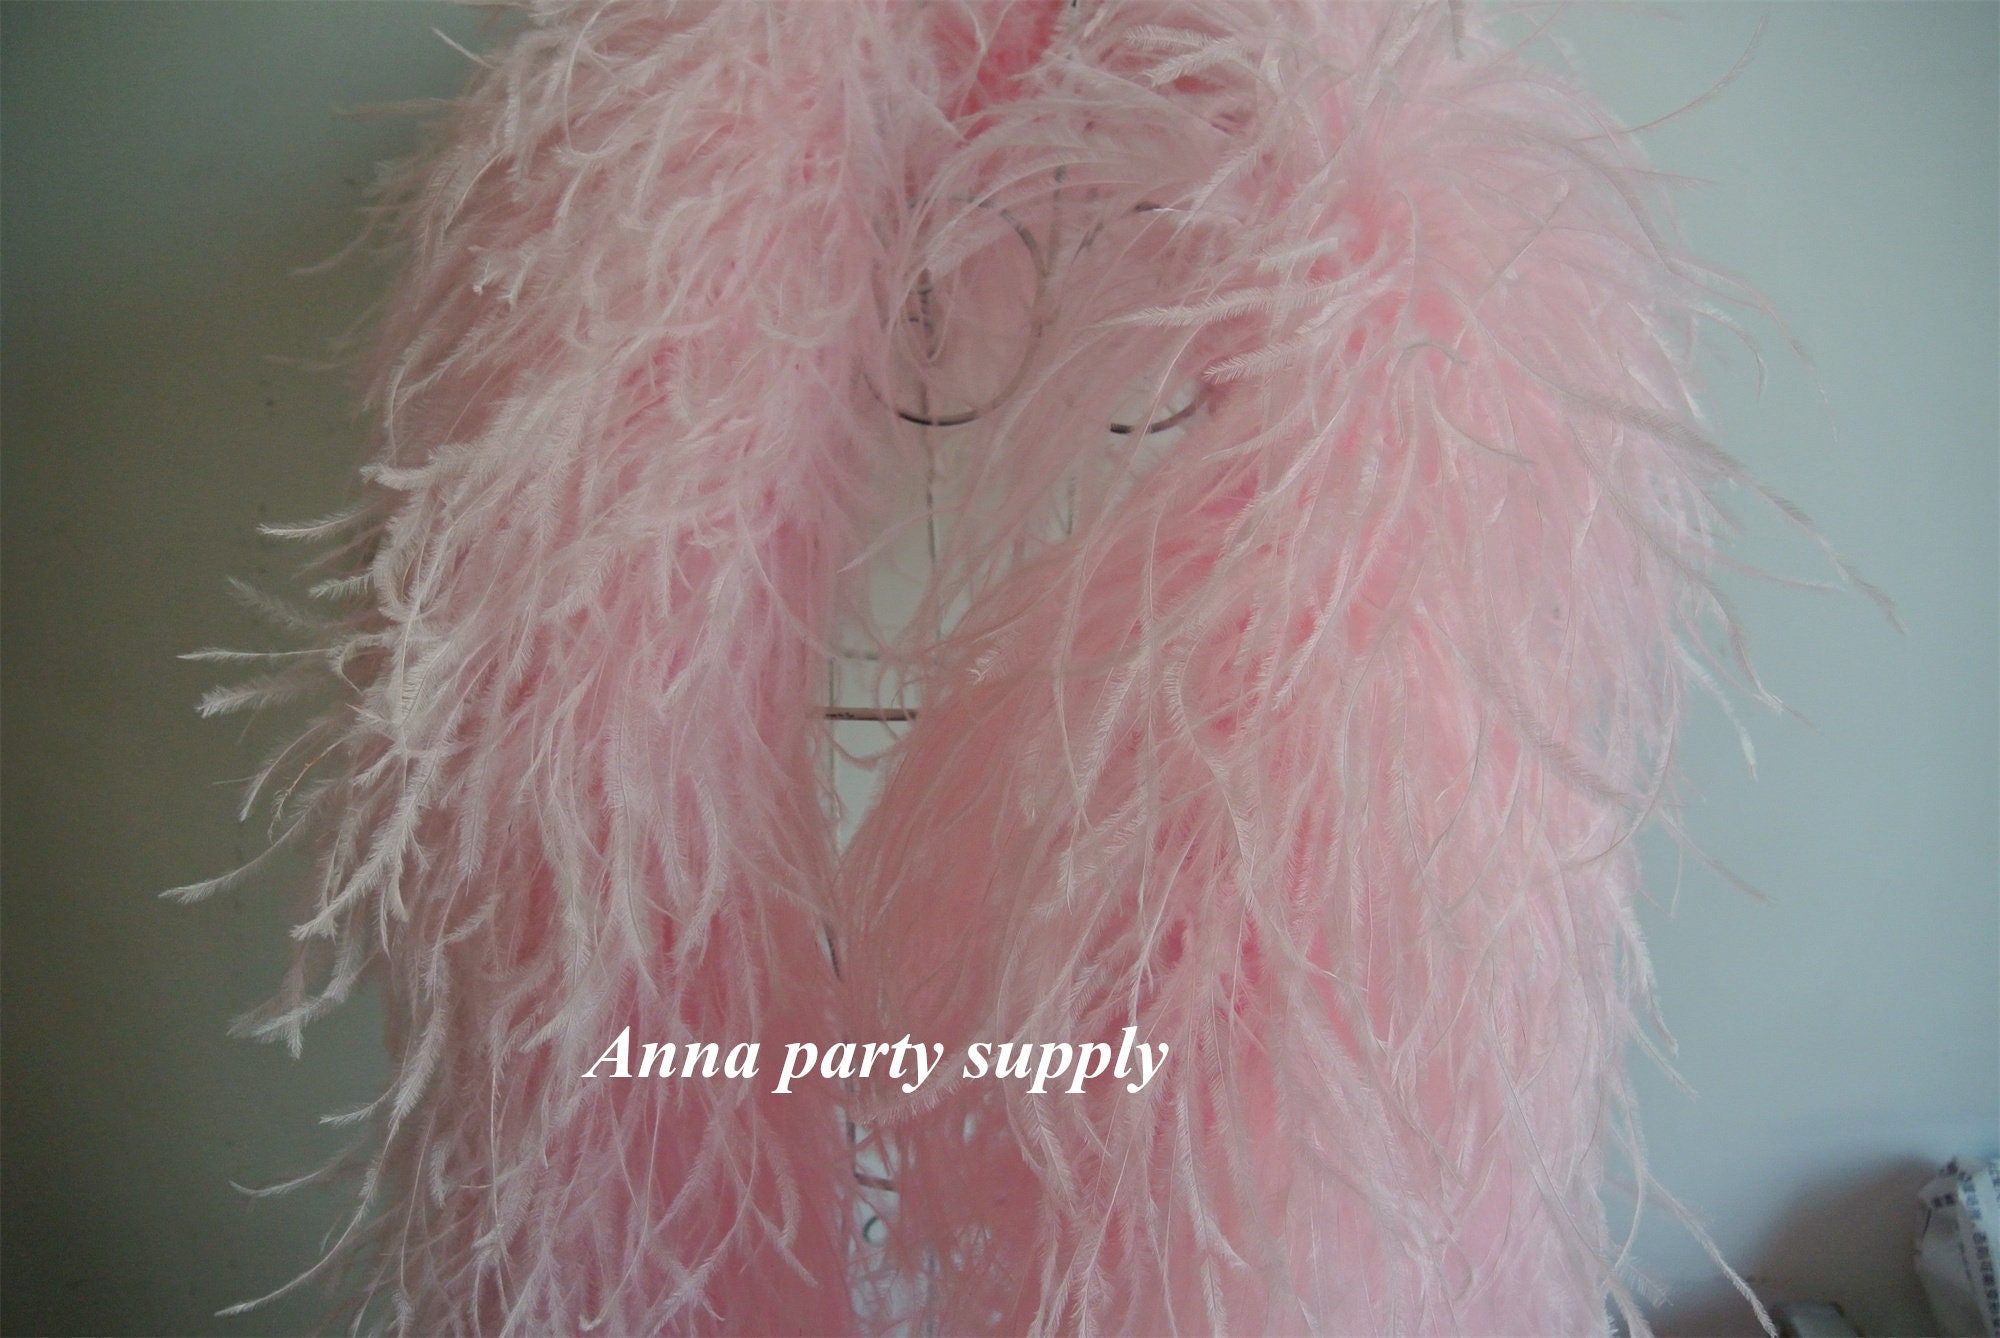 Baby Pink 40 Gram Chandelle Feather Boa, 2 Yard Long-Great for Party,  Wedding, Halloween Costume Decoration